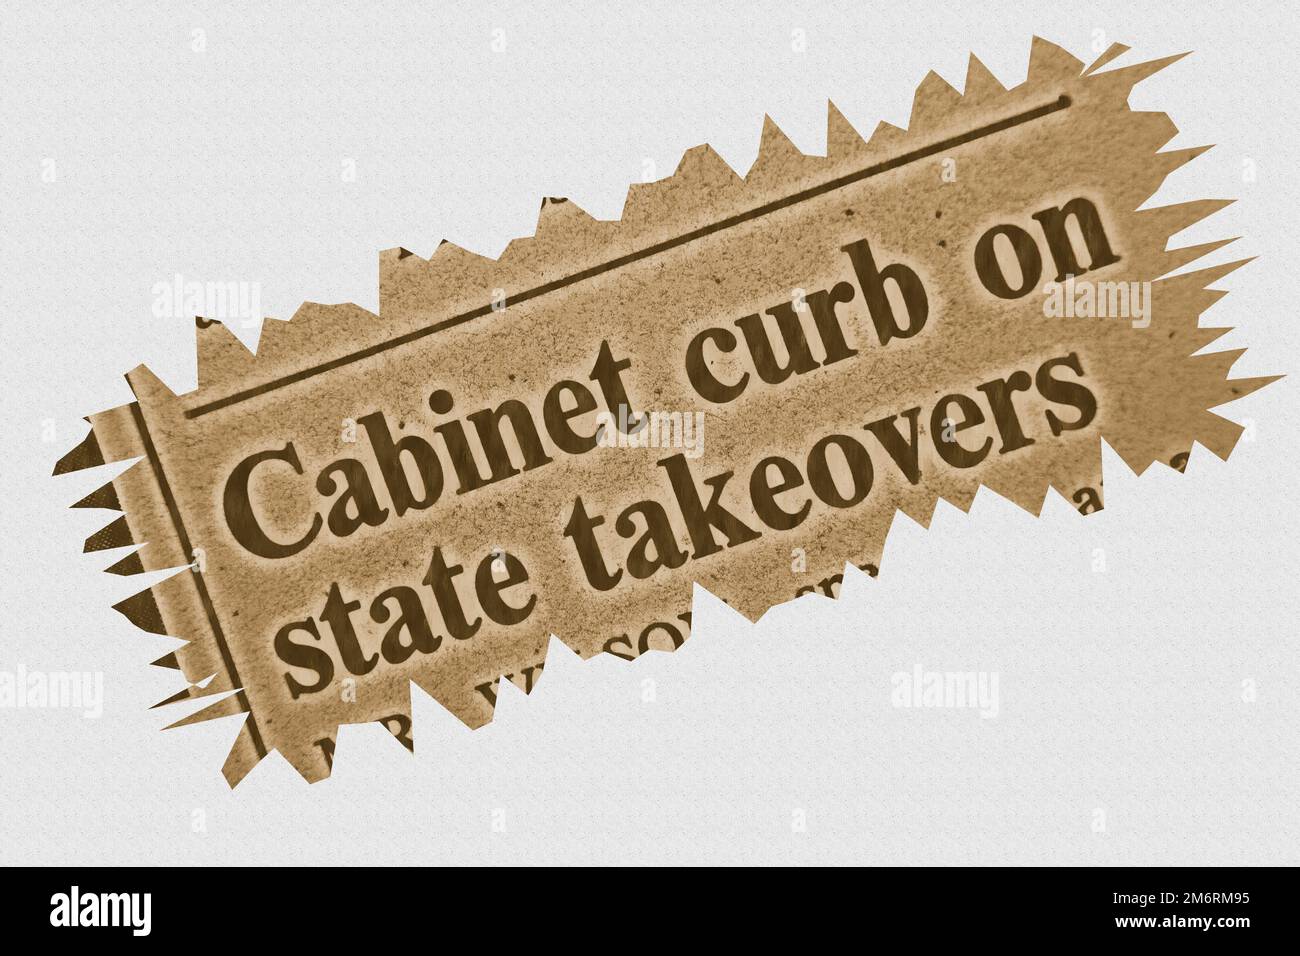 Cabinet curb on state takeovers - news story from 1975 newspaper headline article title with highlighted overlay Stock Photo